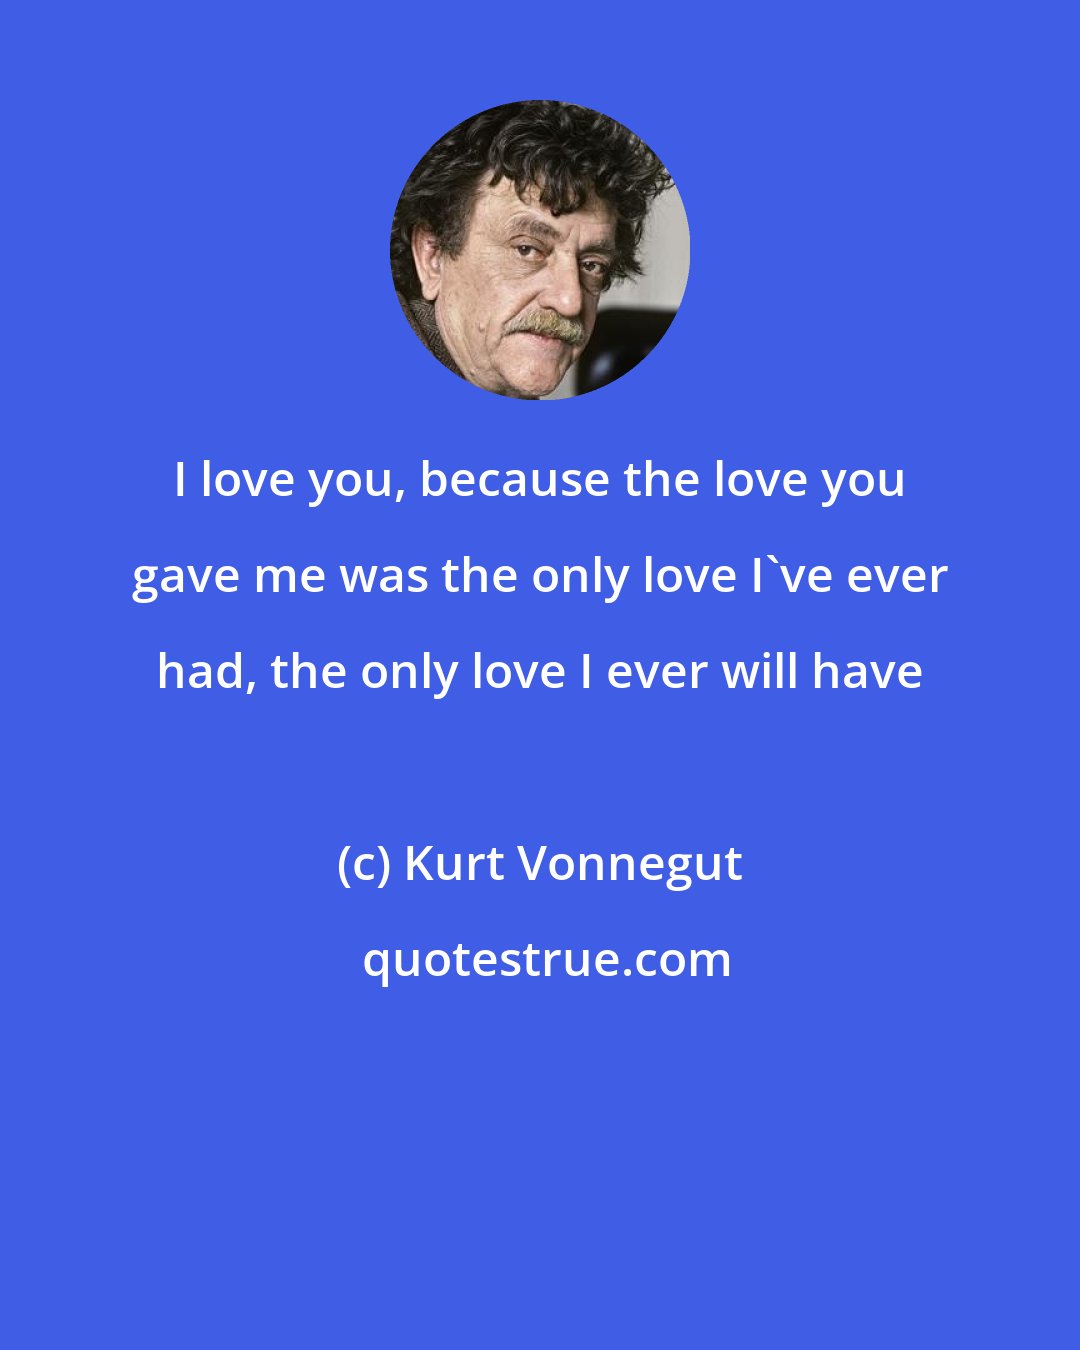 Kurt Vonnegut: I love you, because the love you gave me was the only love I've ever had, the only love I ever will have